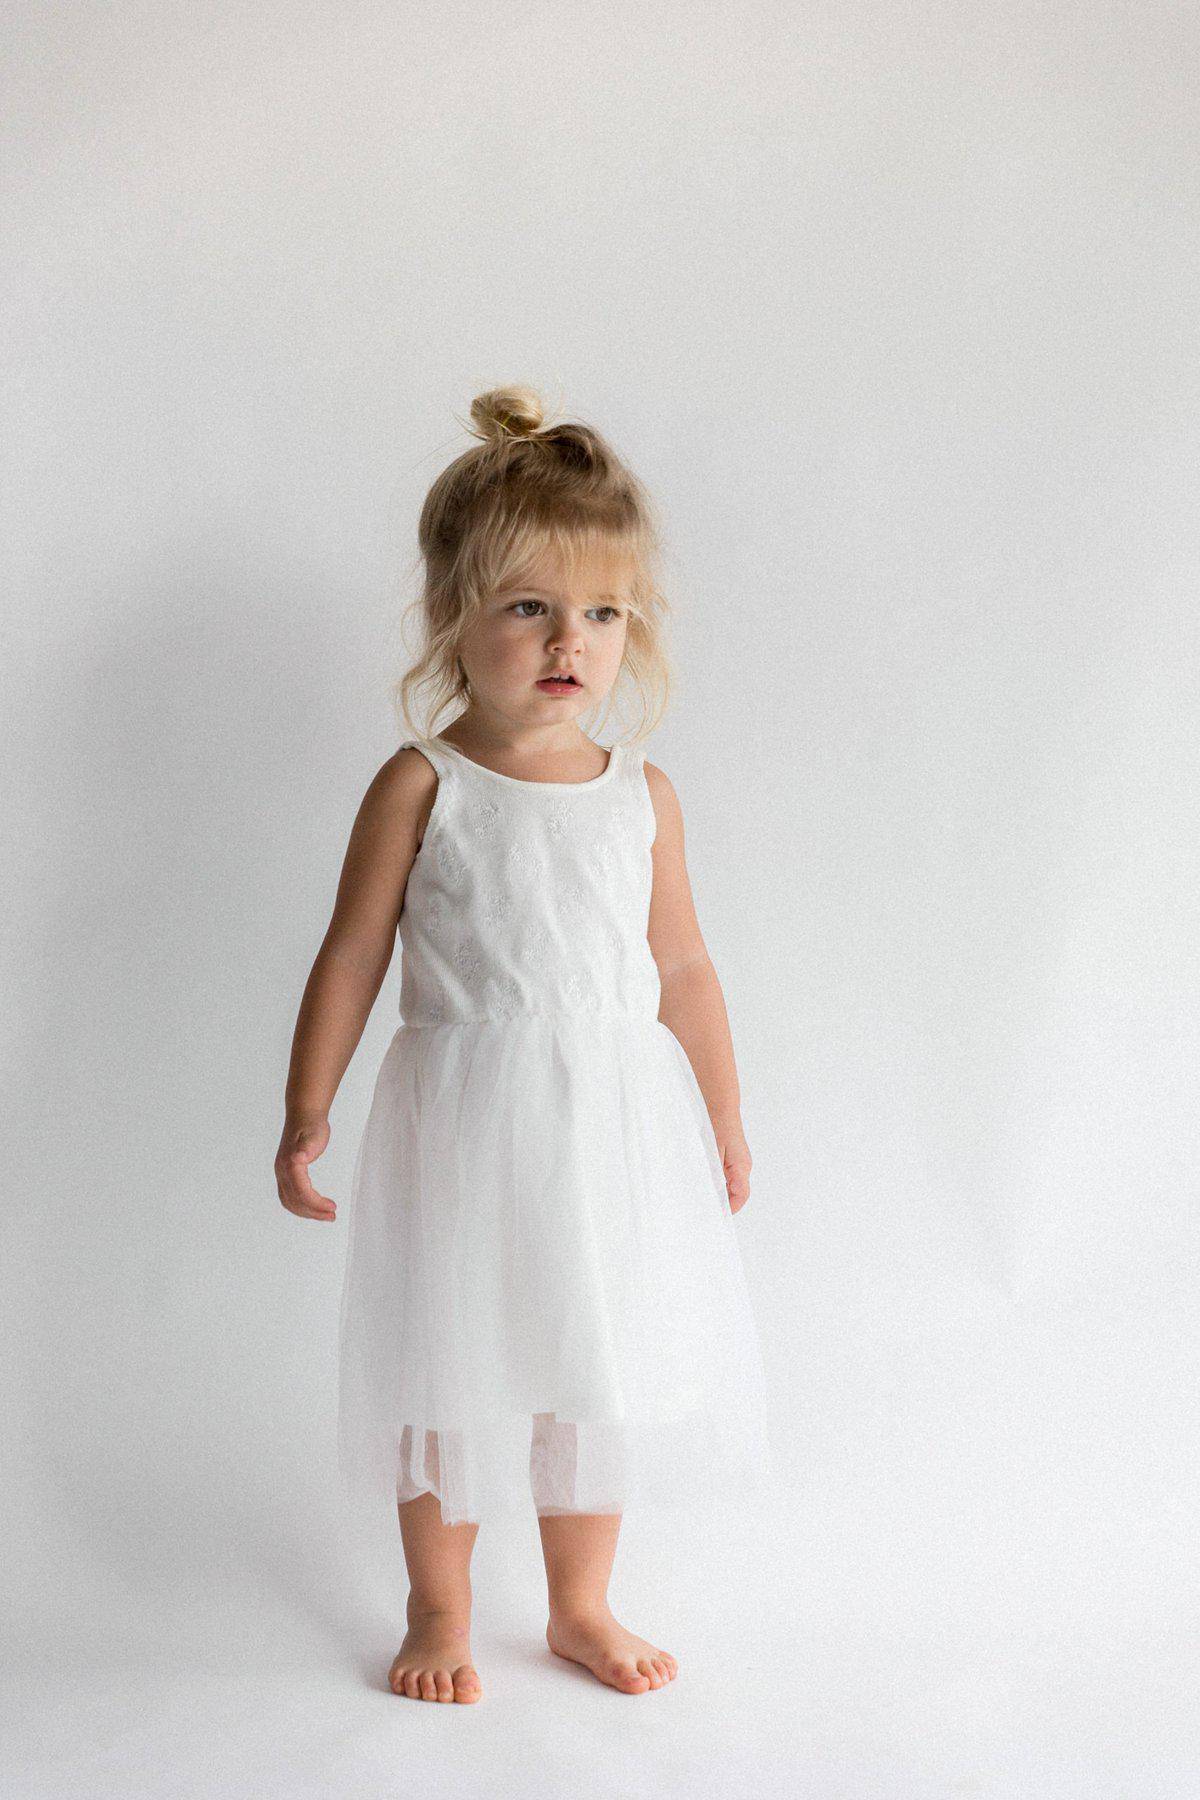 Embroidered Tutu - White - Twinkle Twinkle Little One